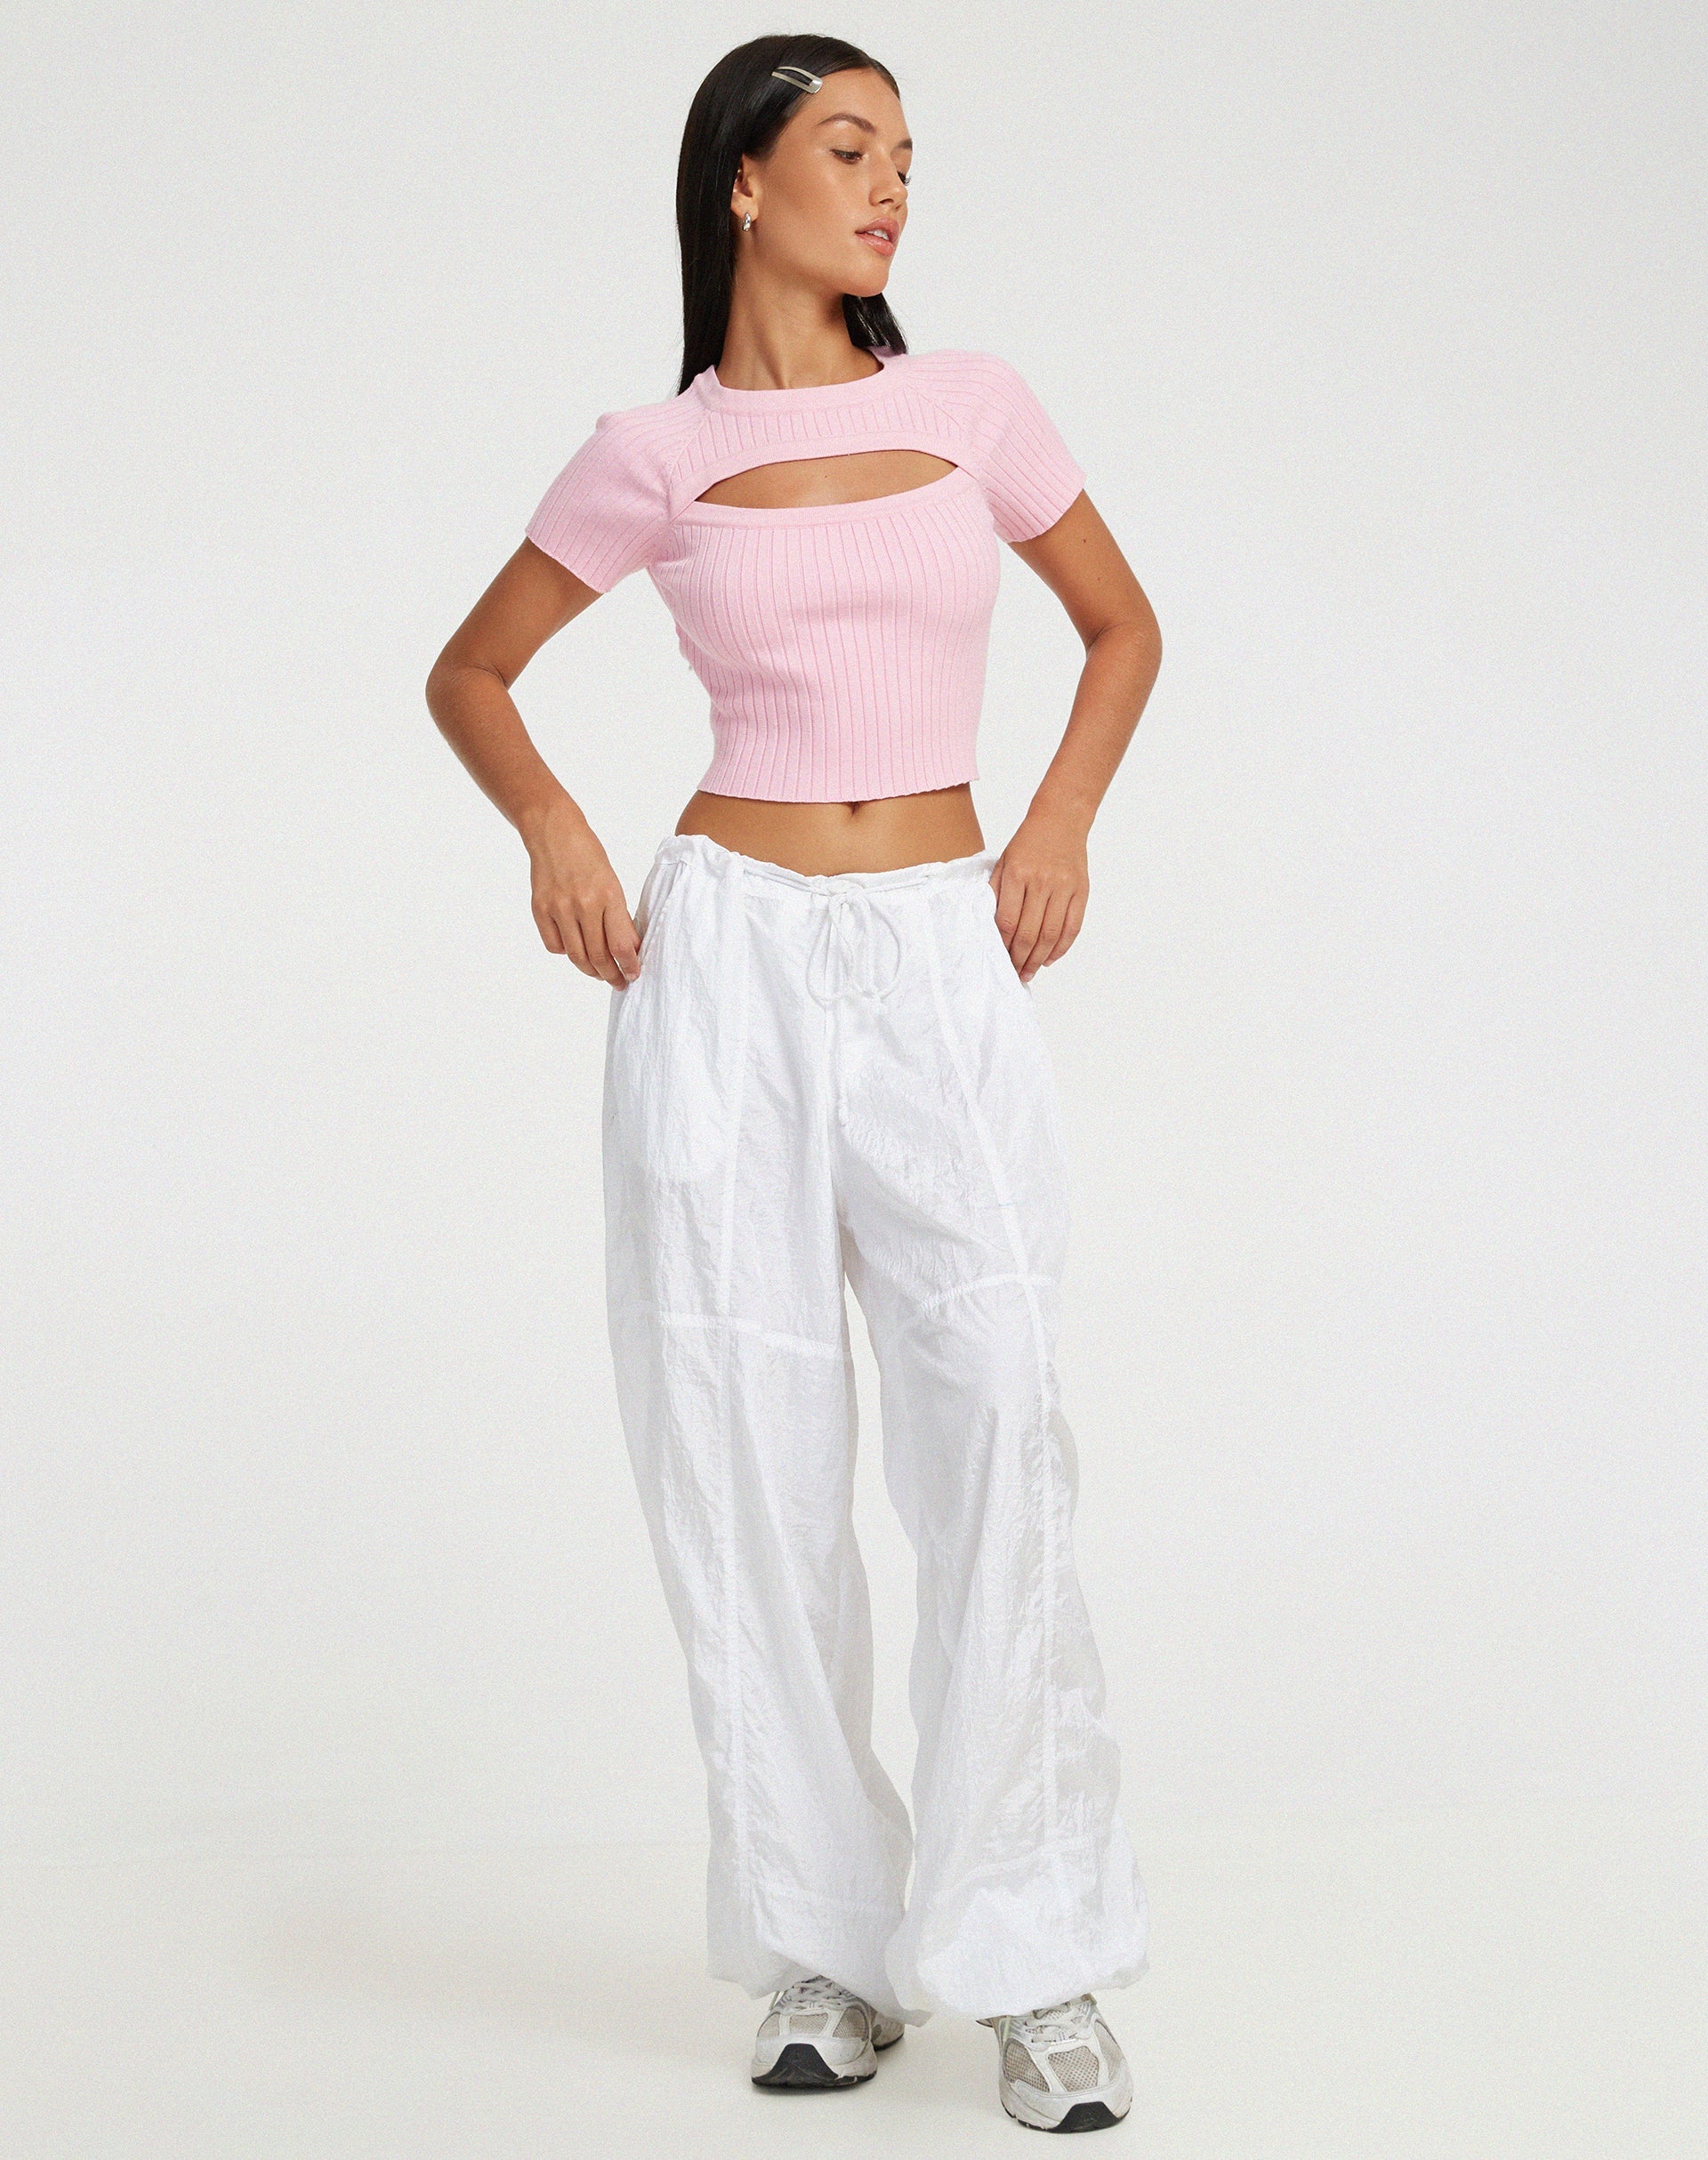 image of Morsche Cut Out Crop Top in Pink